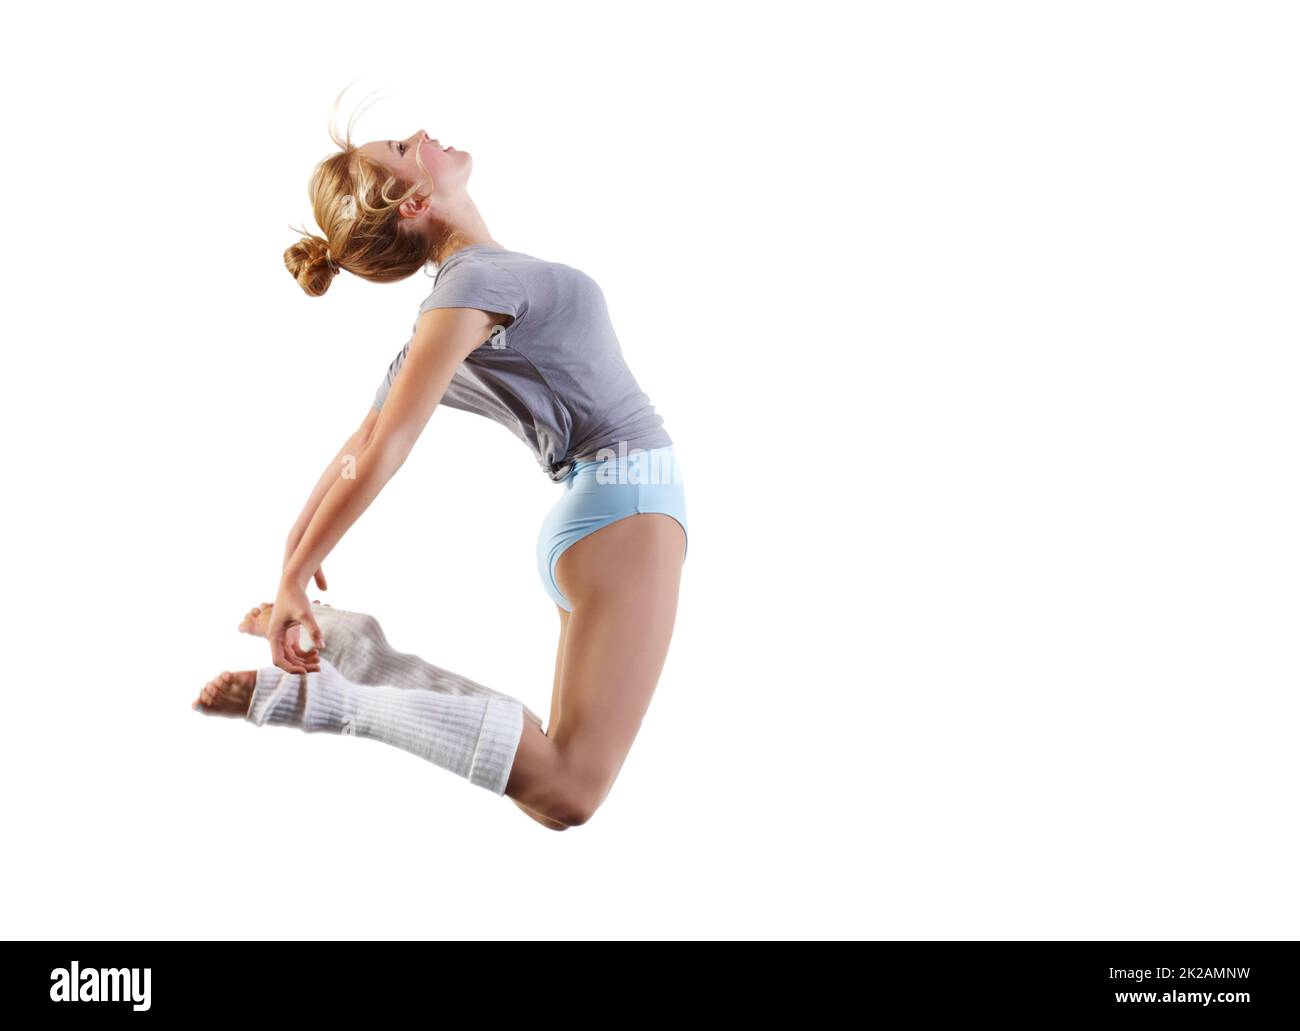 Filled with a desire to dance. Young dancer jumping against a white background. Stock Photo